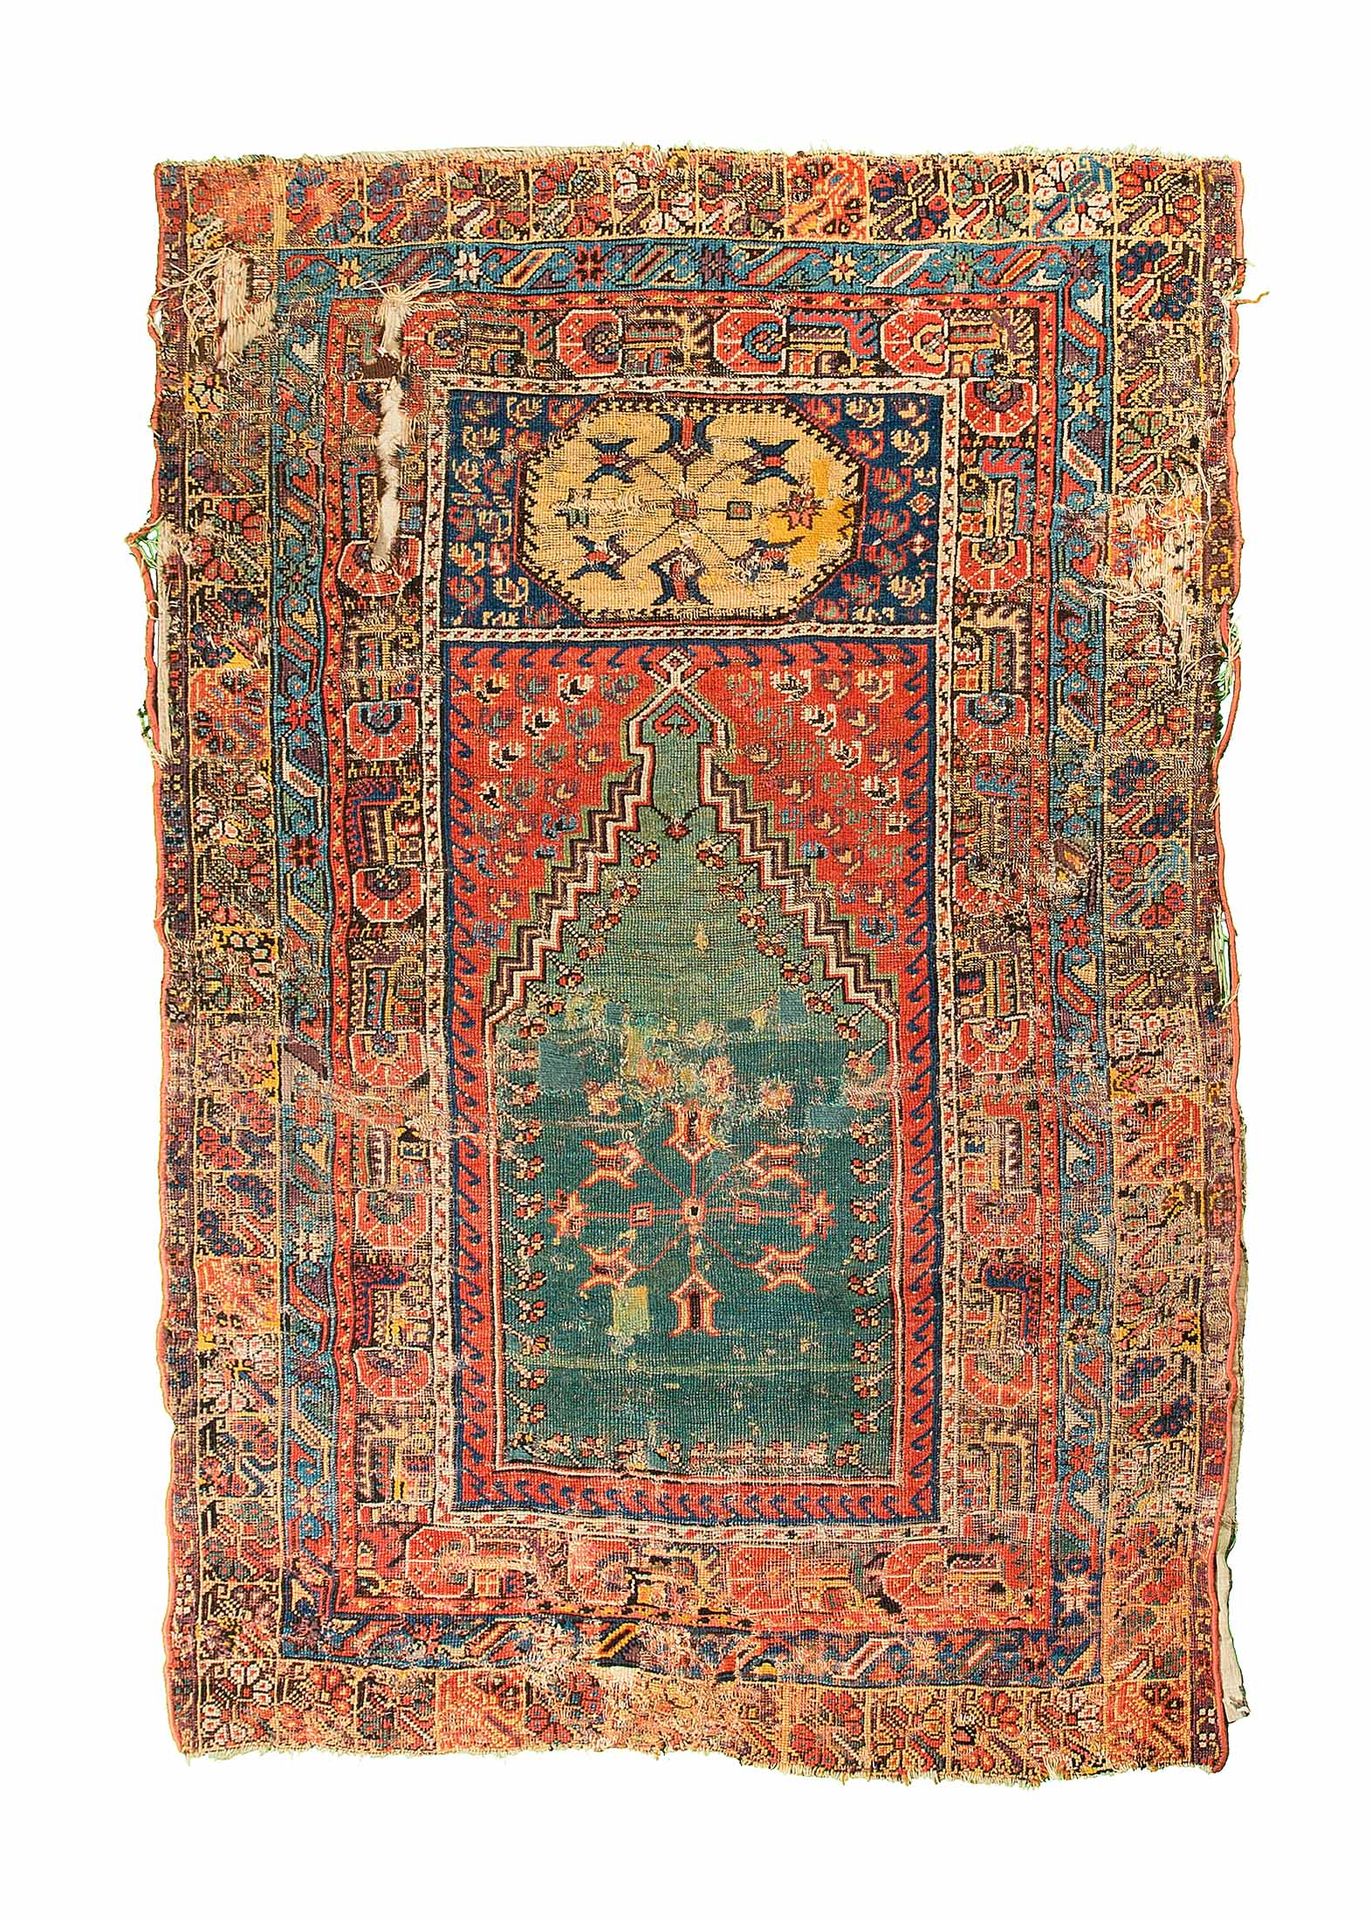 Null Very old MUDJUR carpet (Asia Minor), mid-18th century
Dimensions : 173 x 11&hellip;